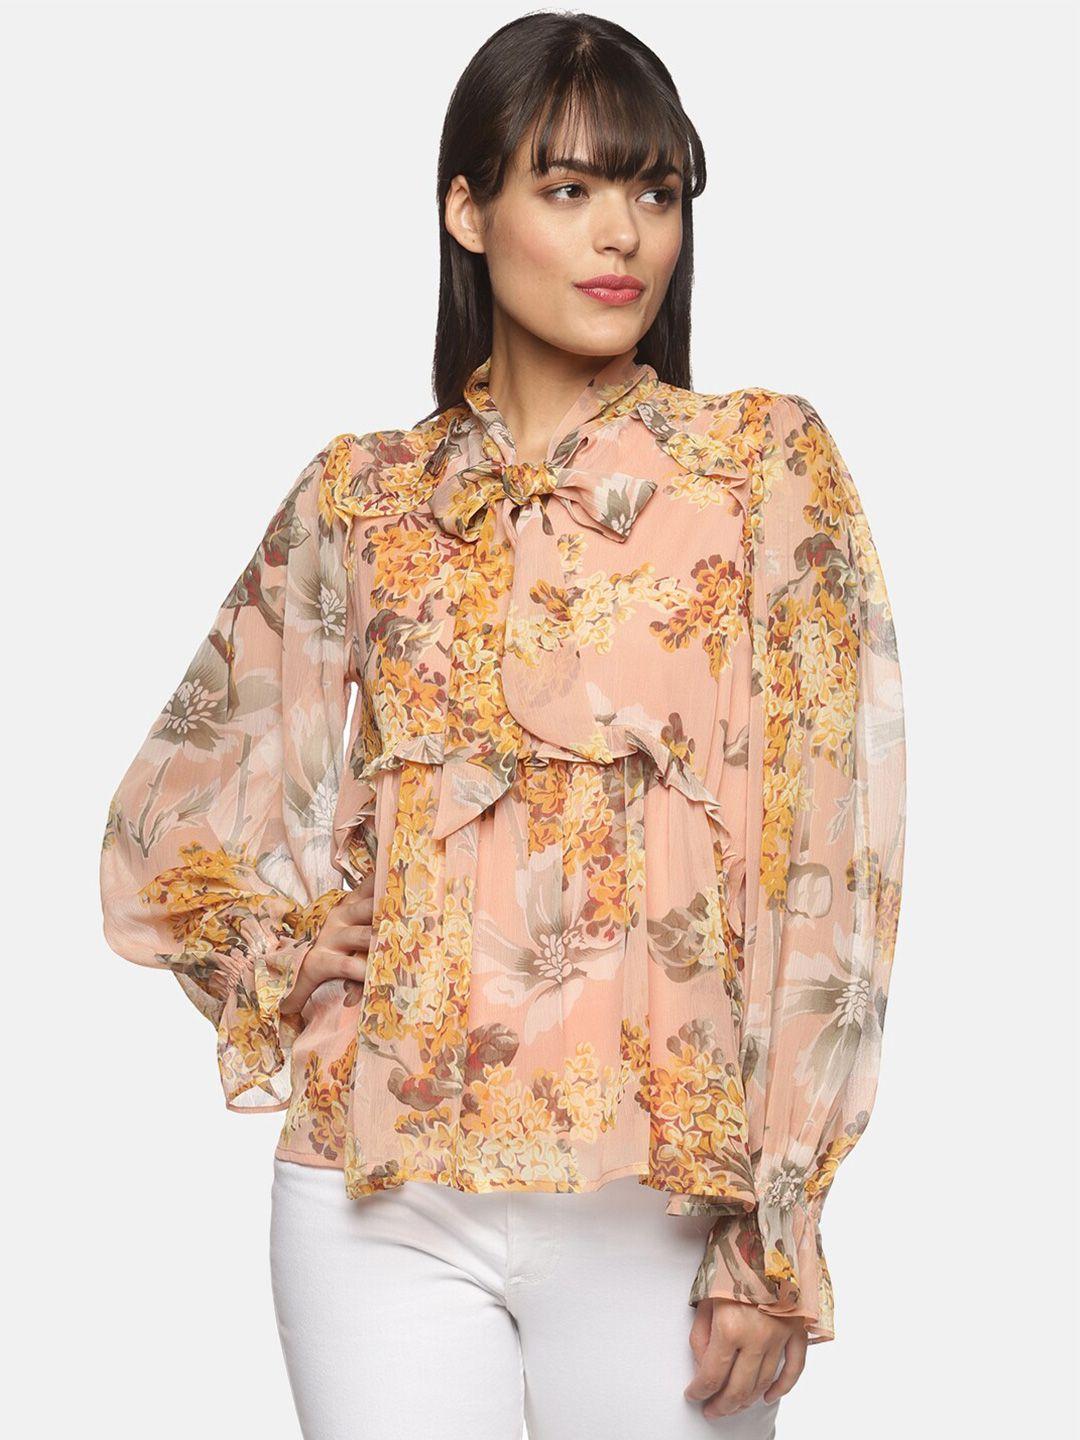 here&now peach-coloured & orange floral print tie-up neck ruffles chiffon top